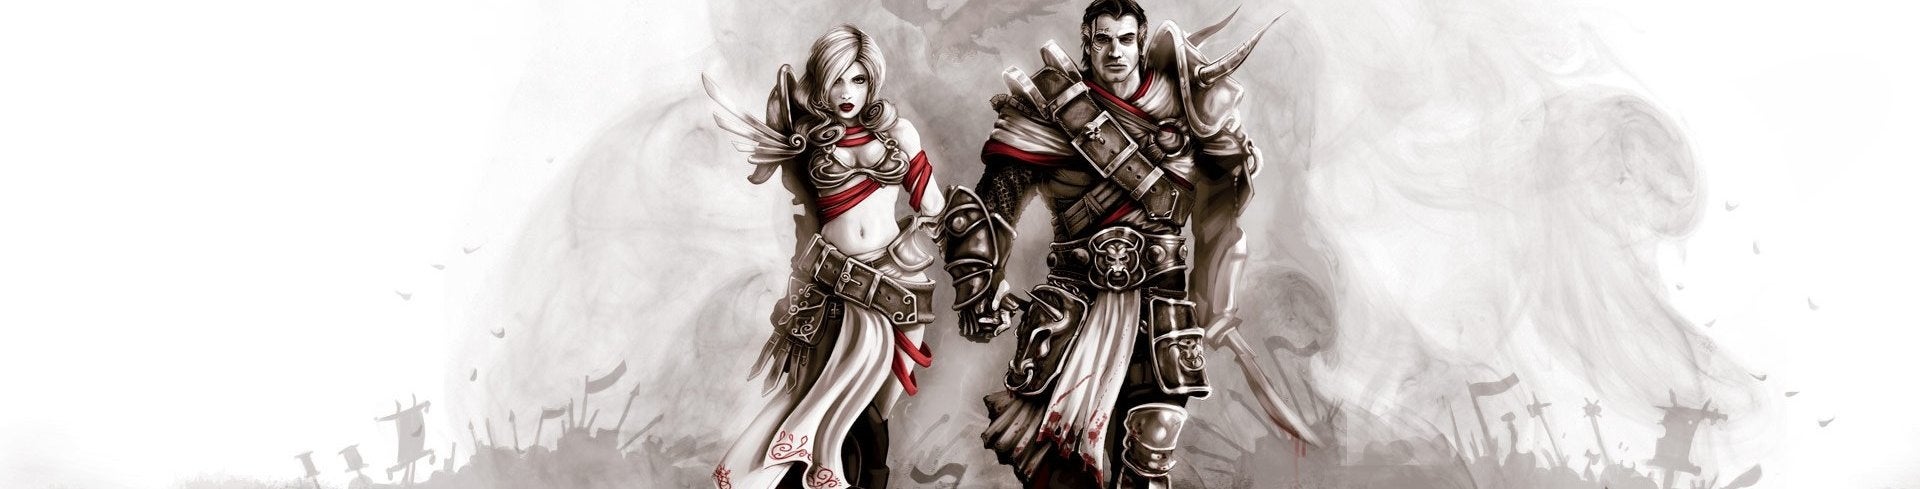 Image for Divinity: Original Sin review